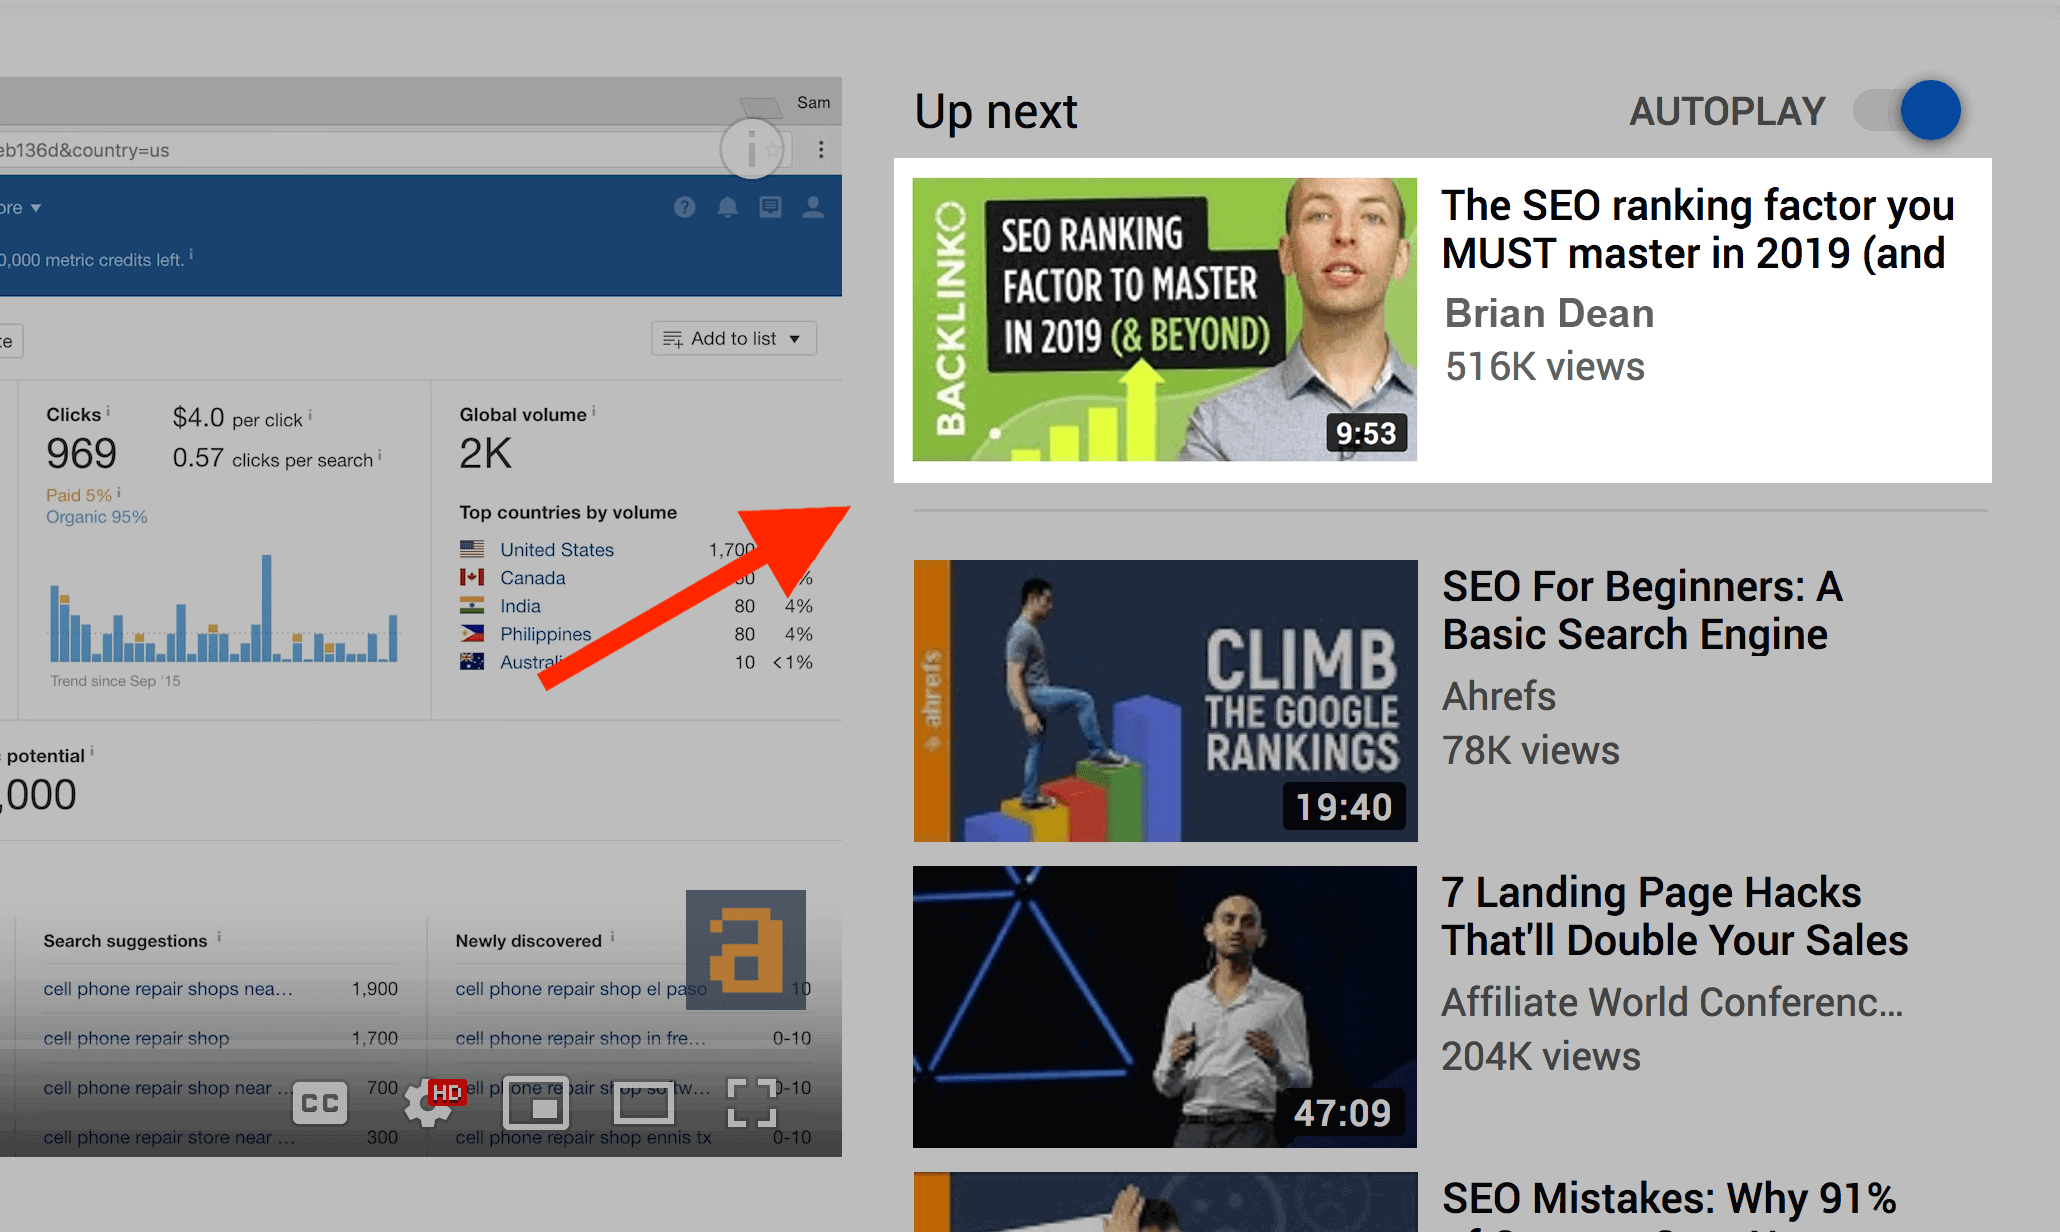 Suggested videos